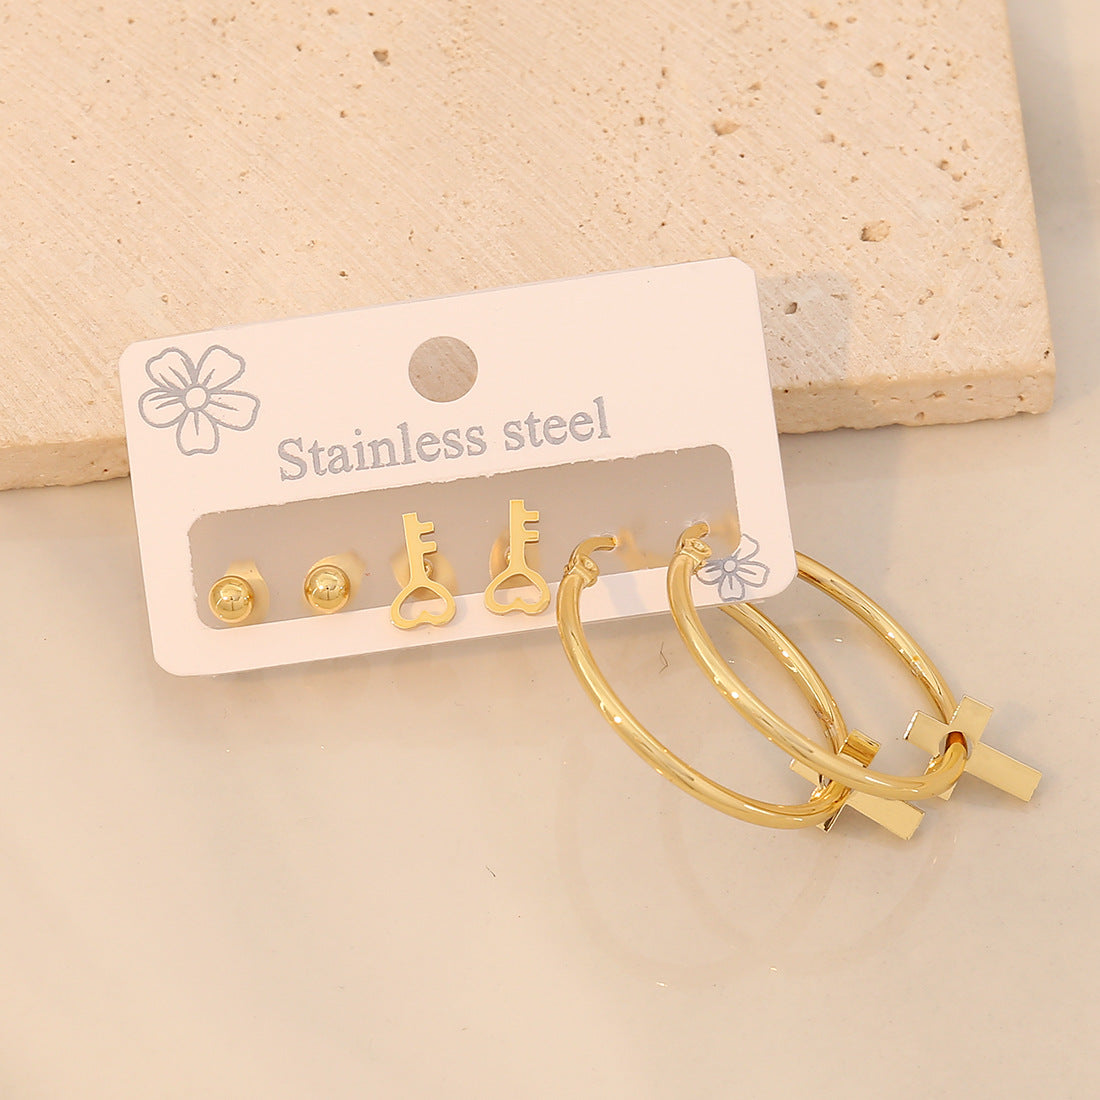 3 Piece Gold-Plated Stainless Steel Earrings